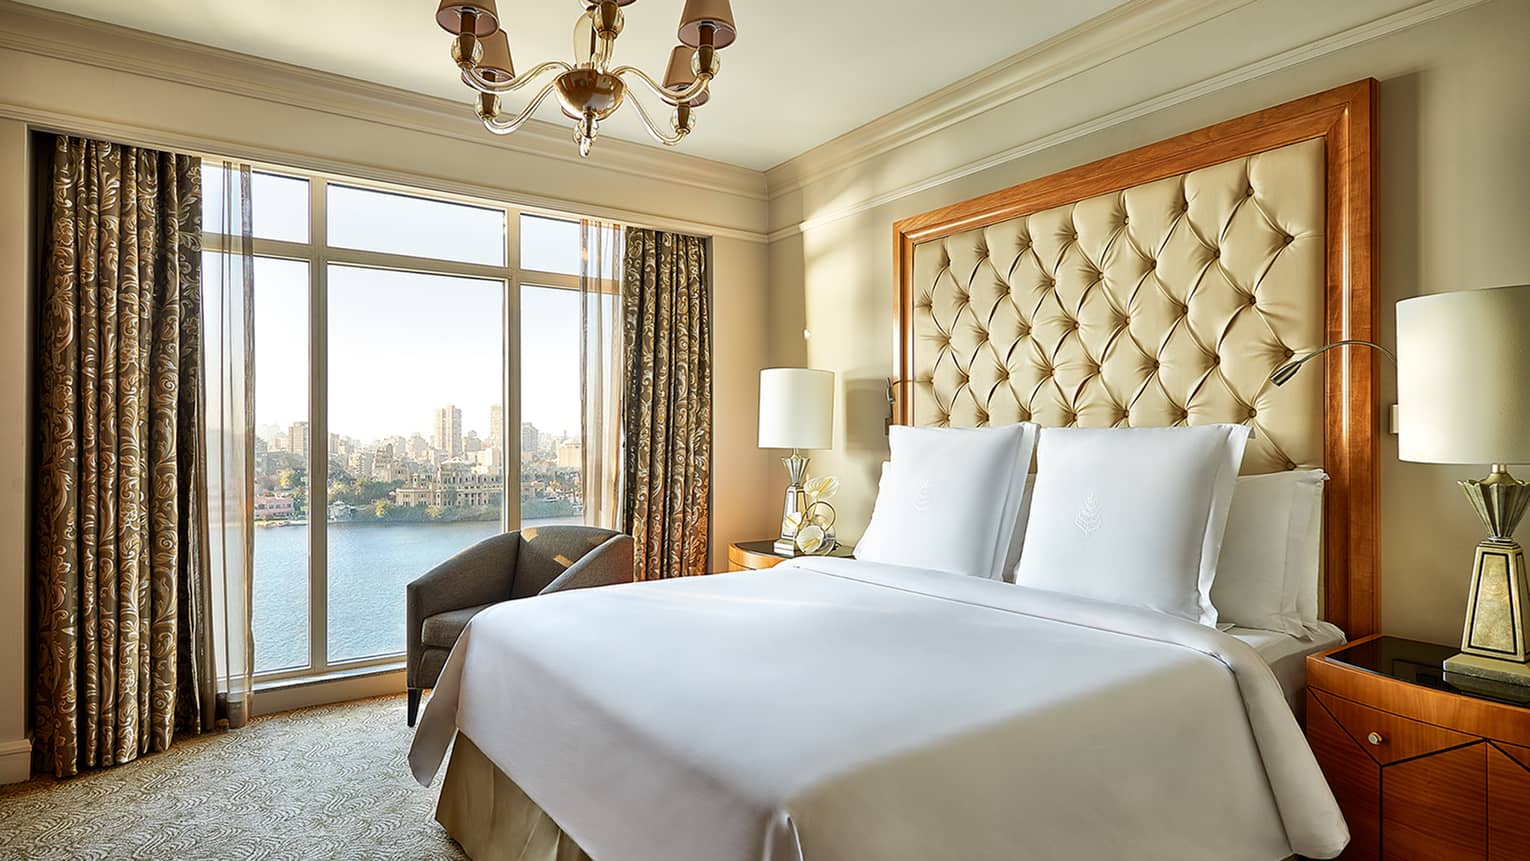 Diplomatic Suite bed with white bedspread, pillows and tall beige leather headboard beside tall window with river view